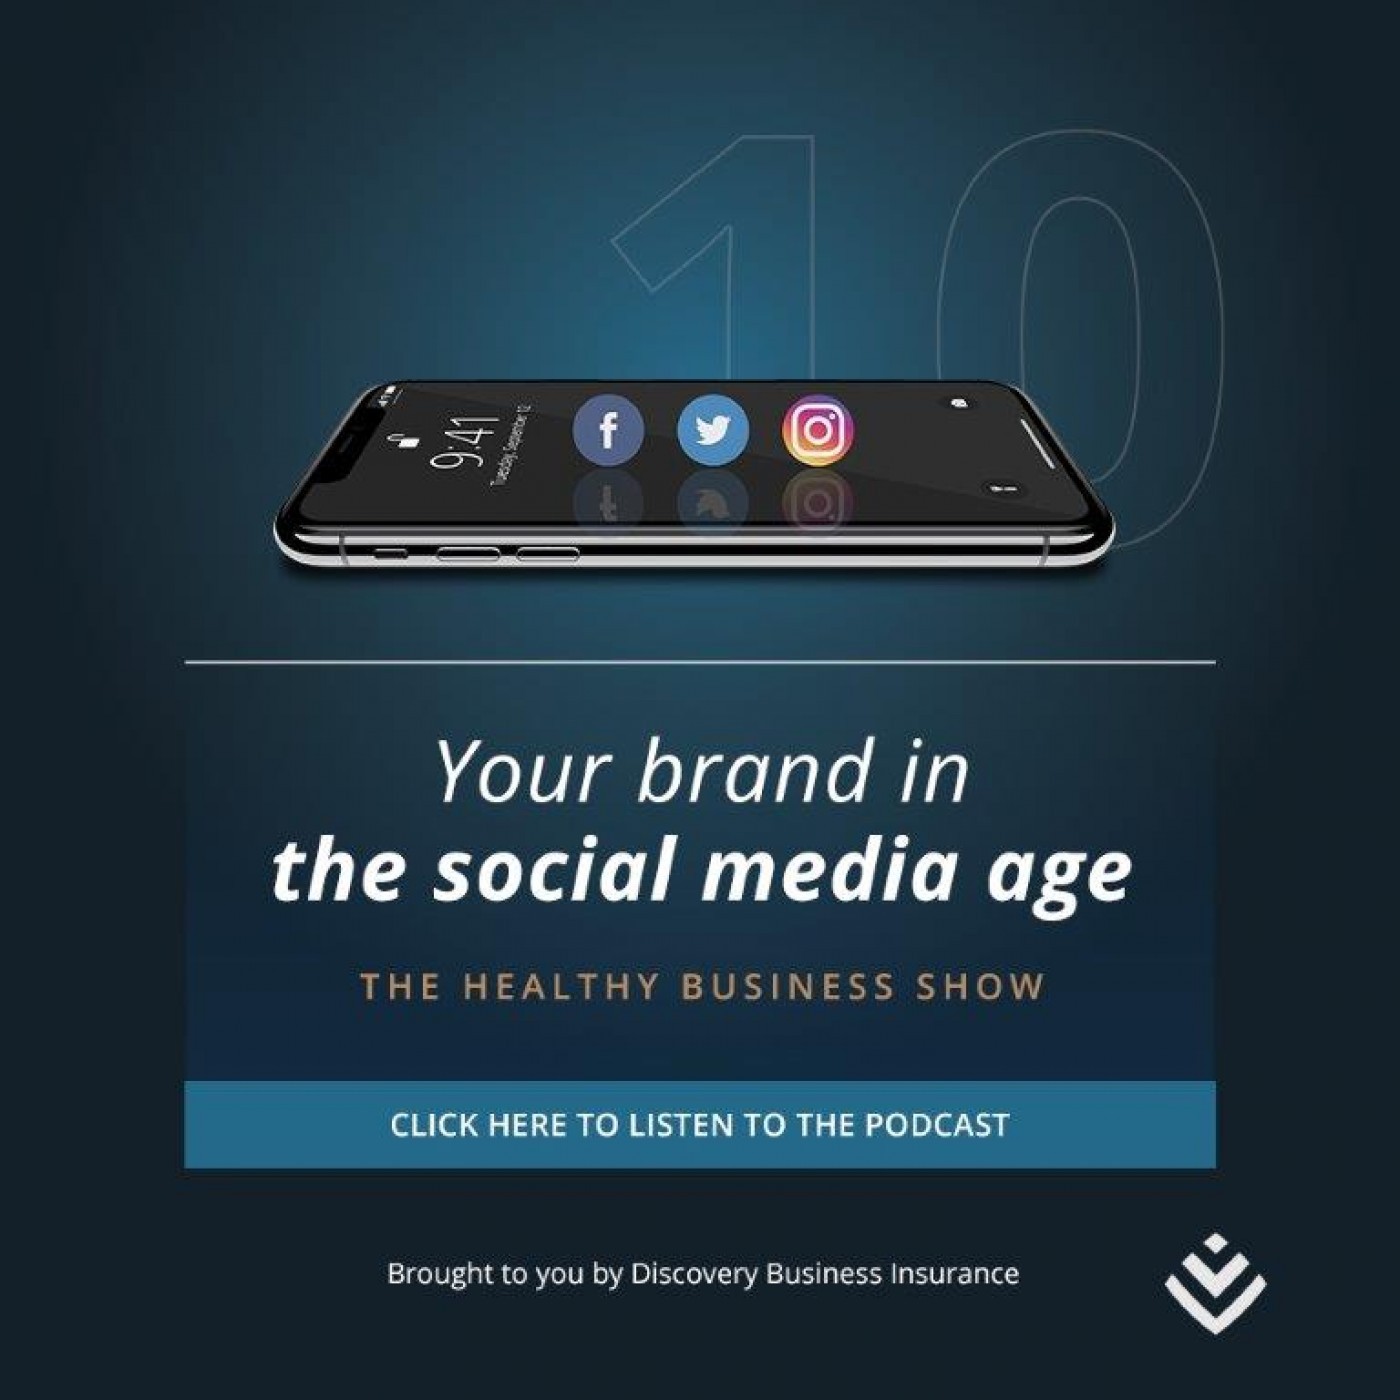 Your brand in the social media age